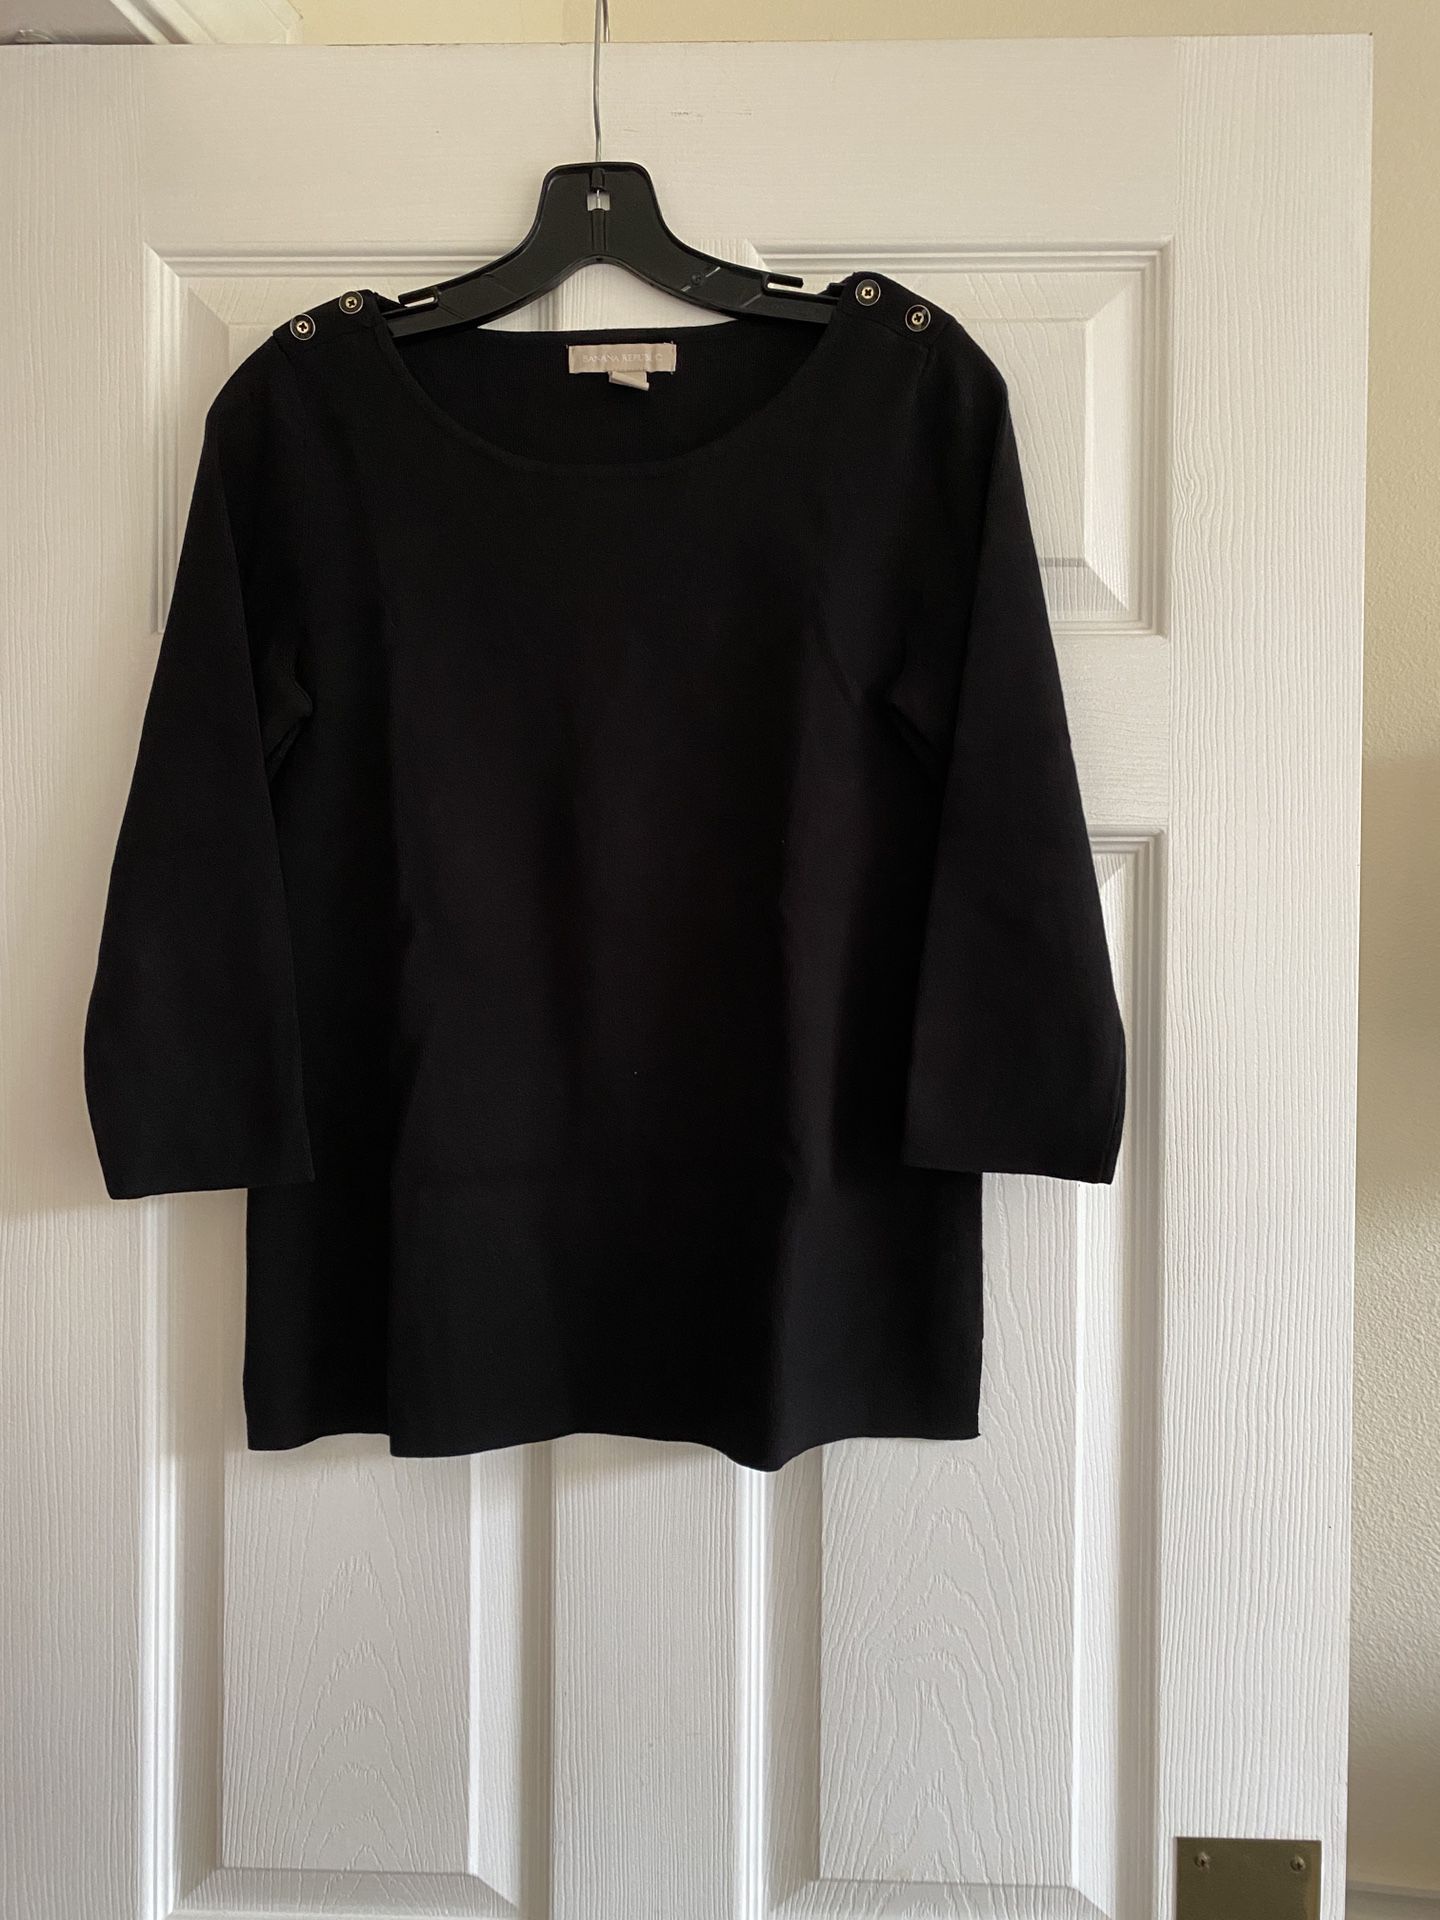 Looks brand new Banana Republic knit long sleeve top. Decorative buttons on shoulders. Straight cut, 